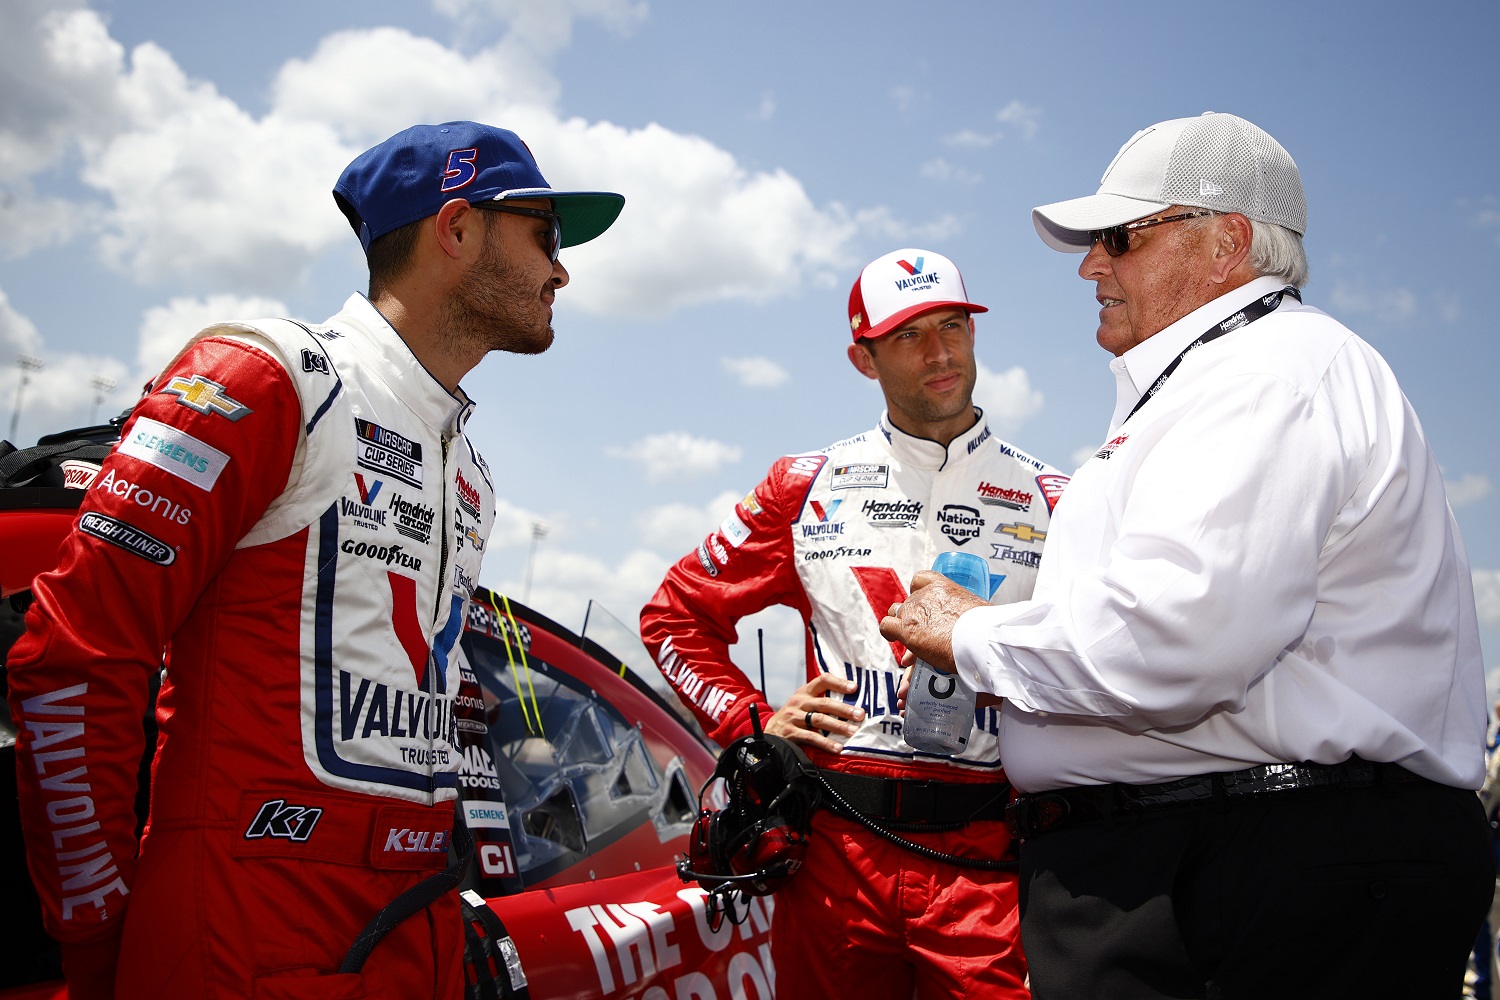 Kyle Larson, driver of the No. 5 Chevrolet, crew chief Cliff Daniels, and NASCAR Hall of Famer and team owner Rick Hendrick talk before the NASCAR Cup Series Ally 400 at Nashville Superspeedway on June 20, 2021. | Jared C. Tilton/Getty Images